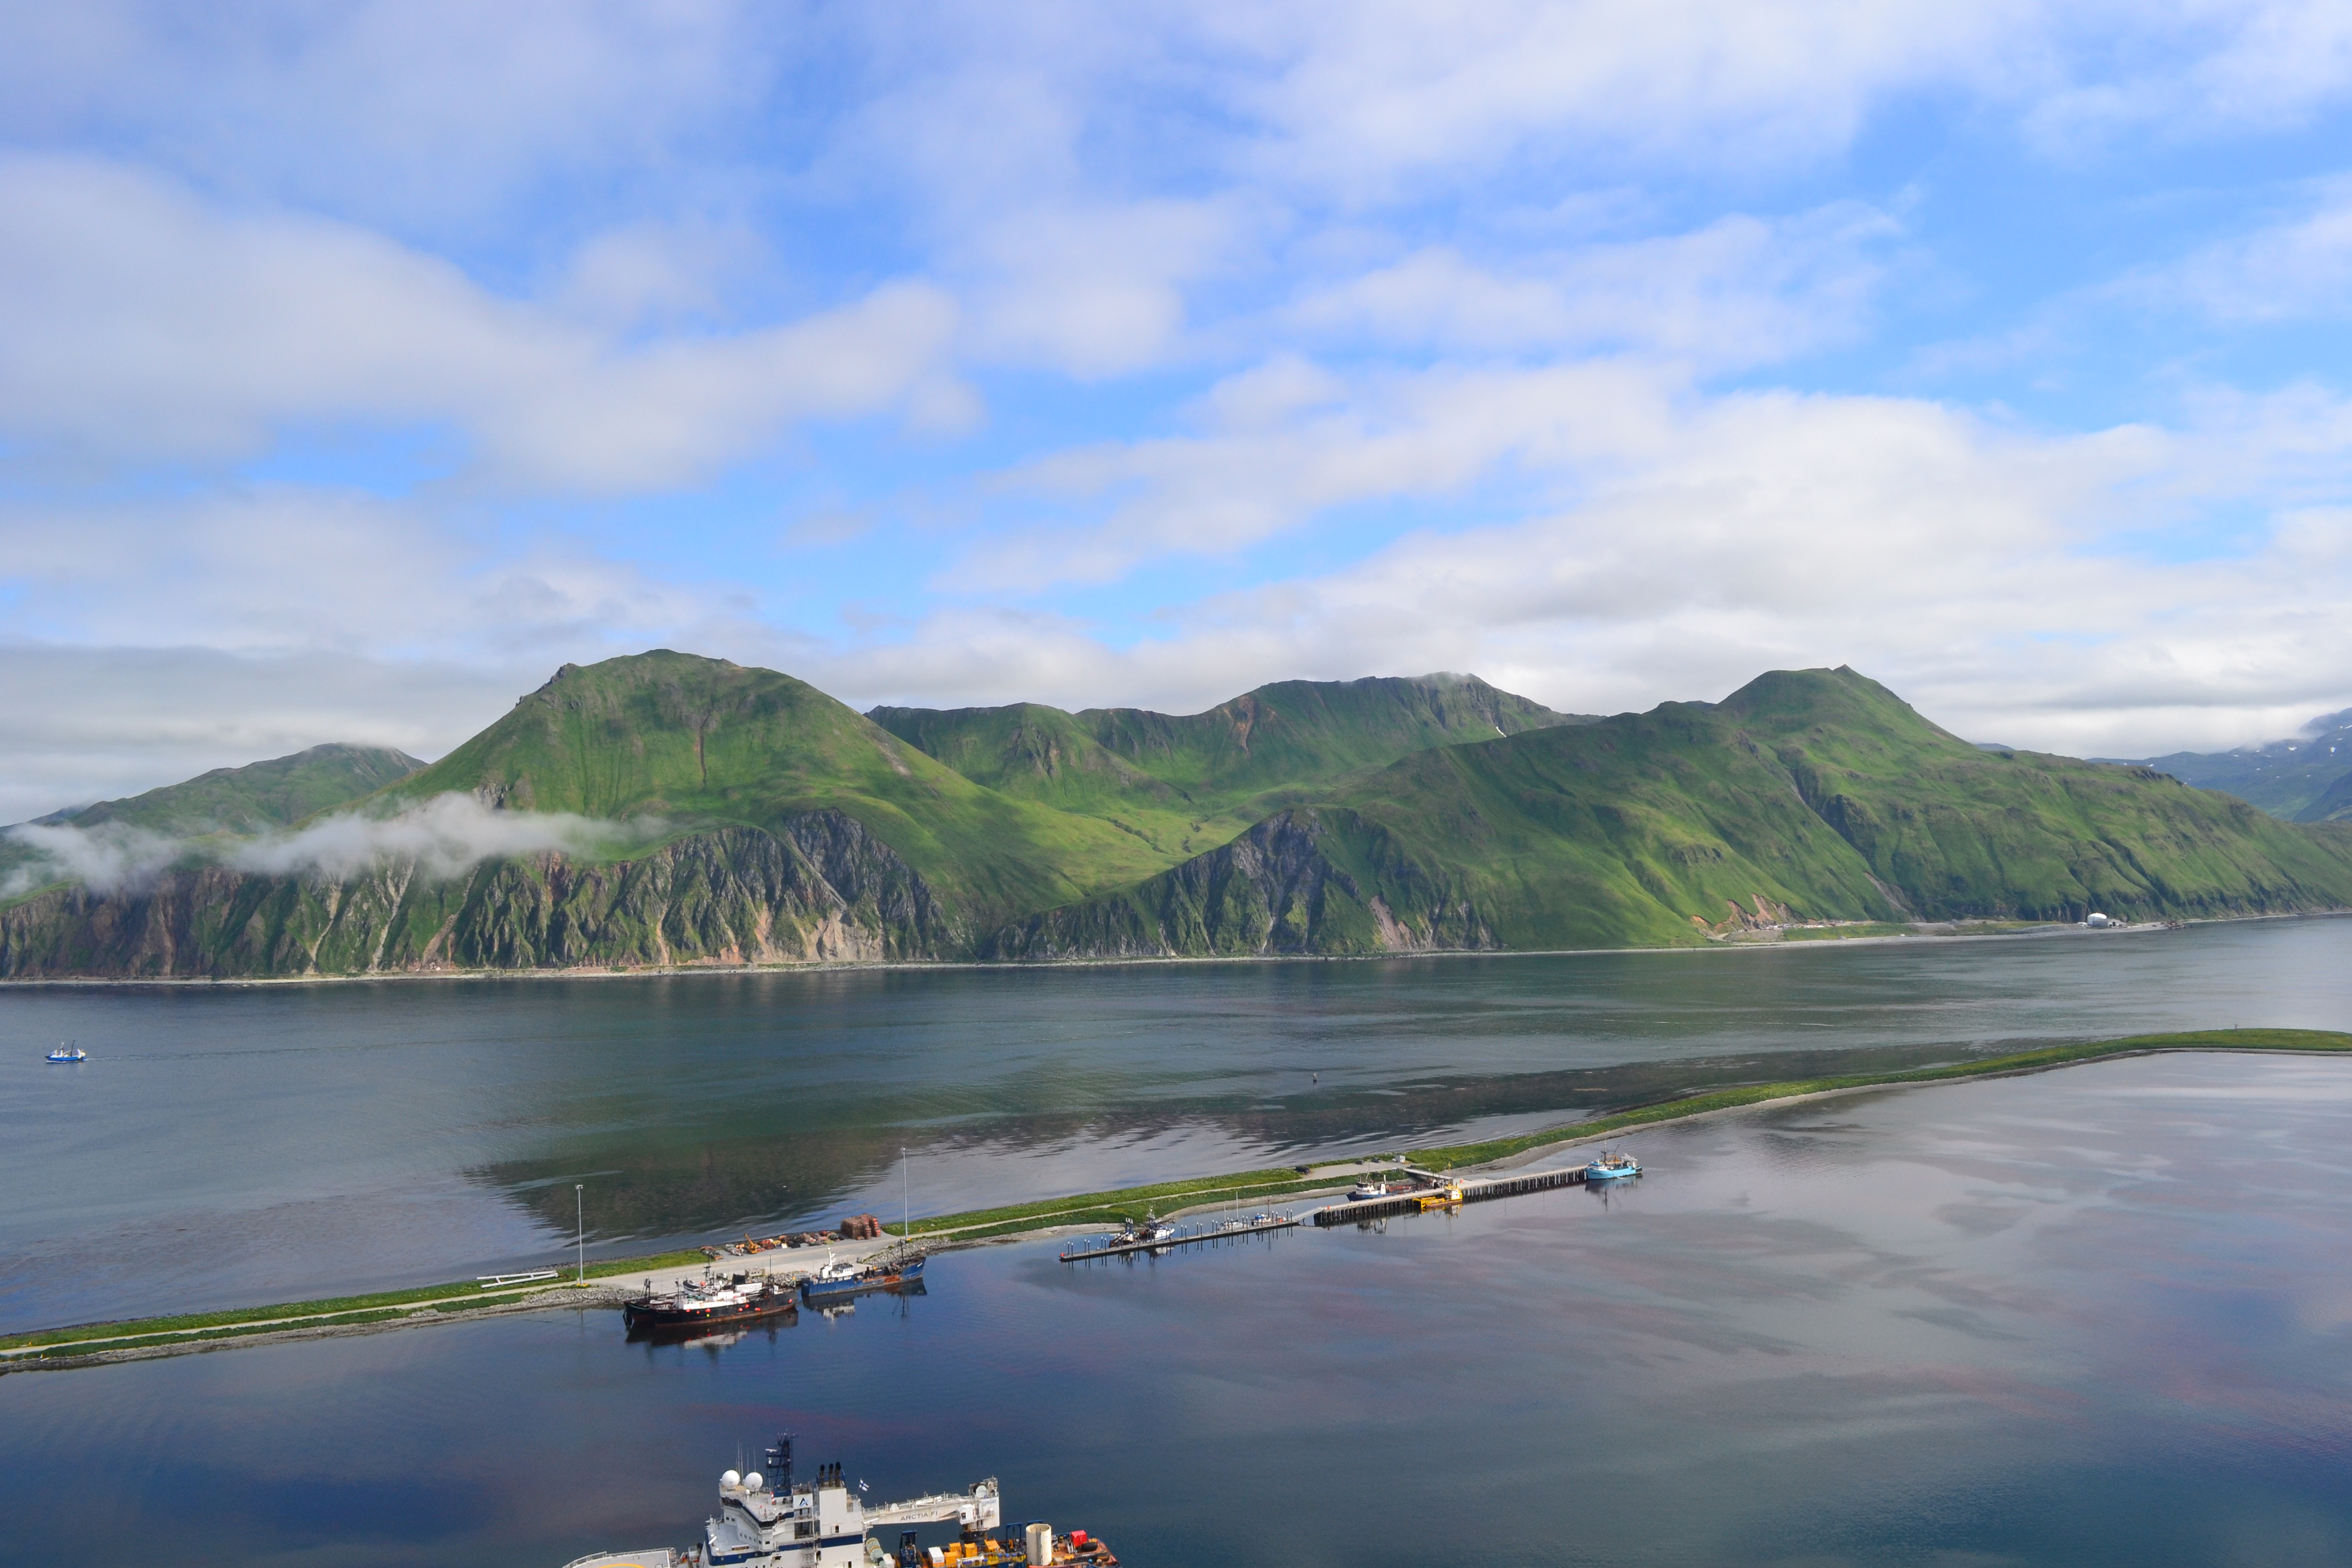 Spit and Dutch Harbor (Photo by Angel Shubert)